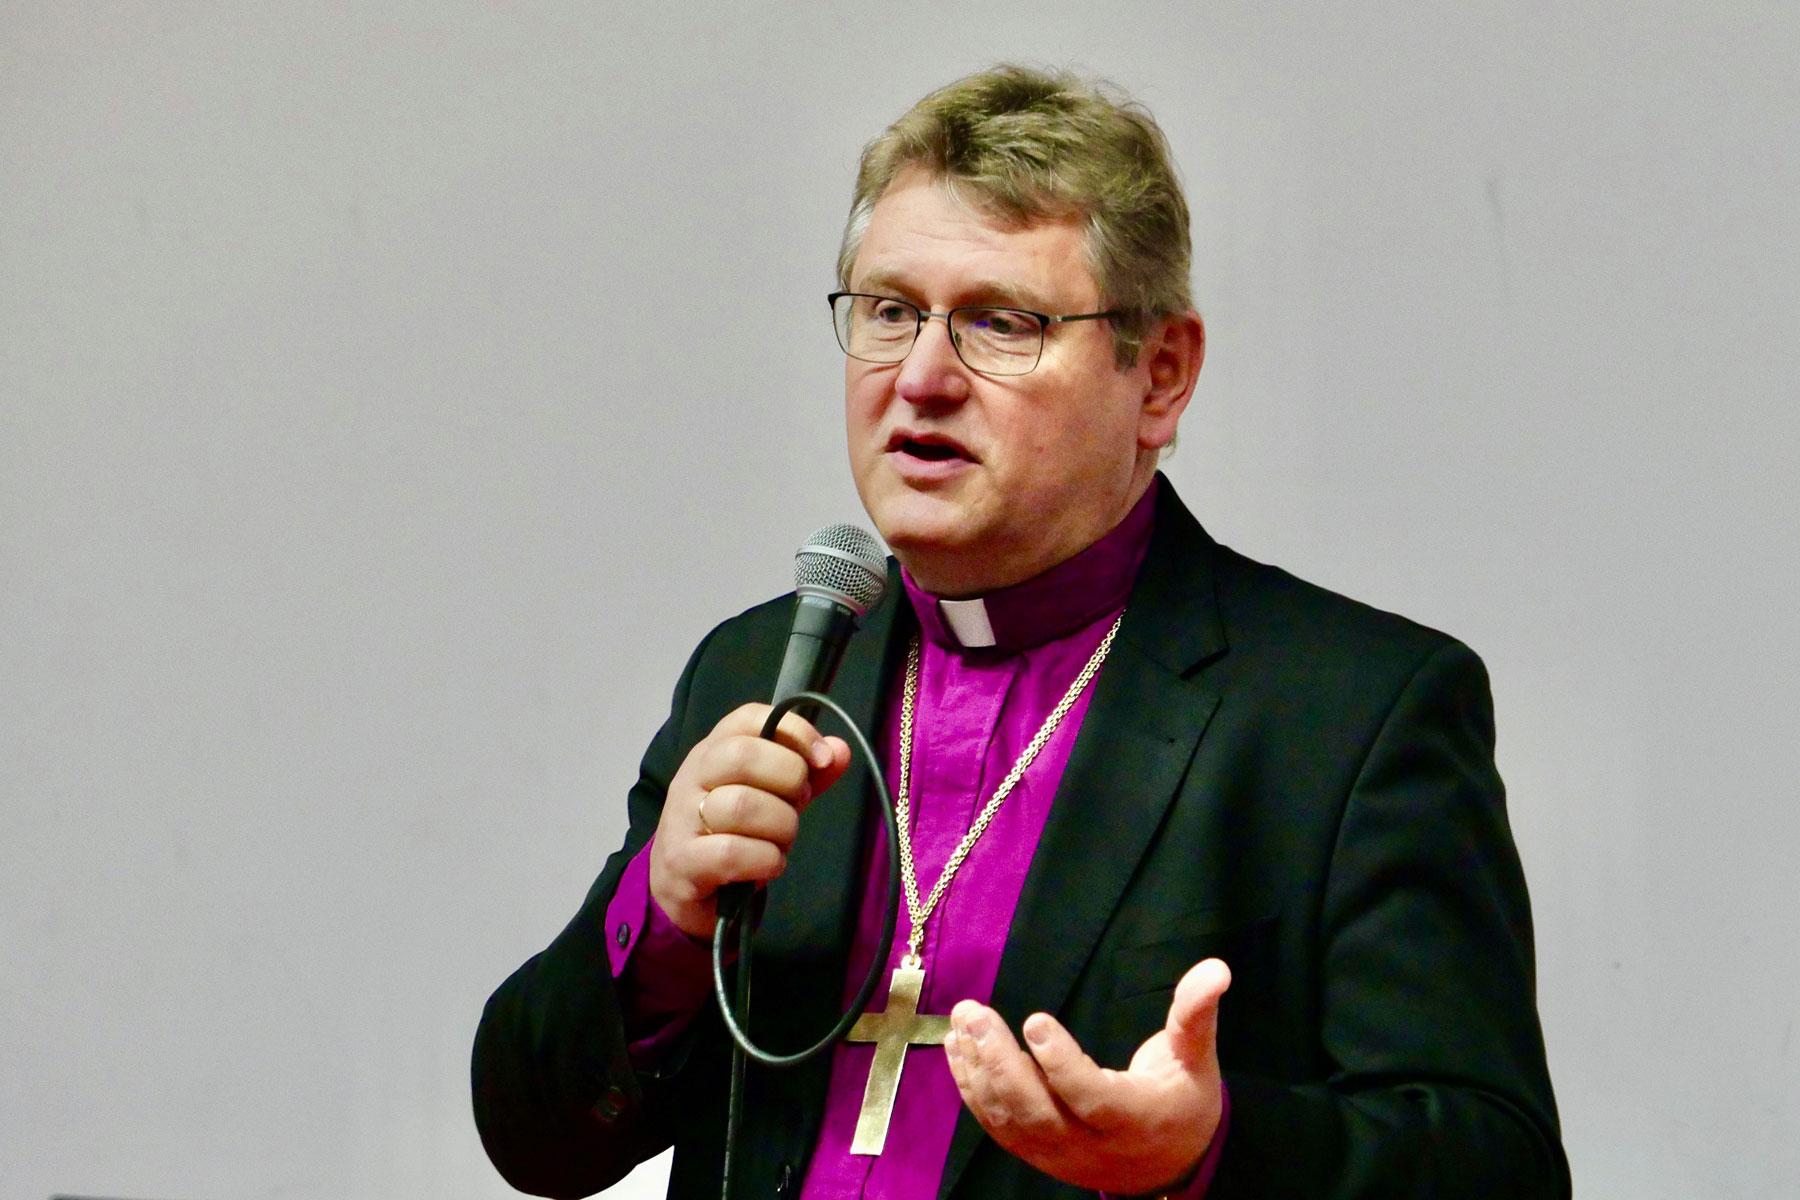 Jerzy Samiec, Presiding Bishop of the Evangelical Church of the Augsburg Confession in Poland, expresses his concern about the state of the democracy in the country and procedures around the upcoming presidential elections. Photo: Dariusz Bruncz